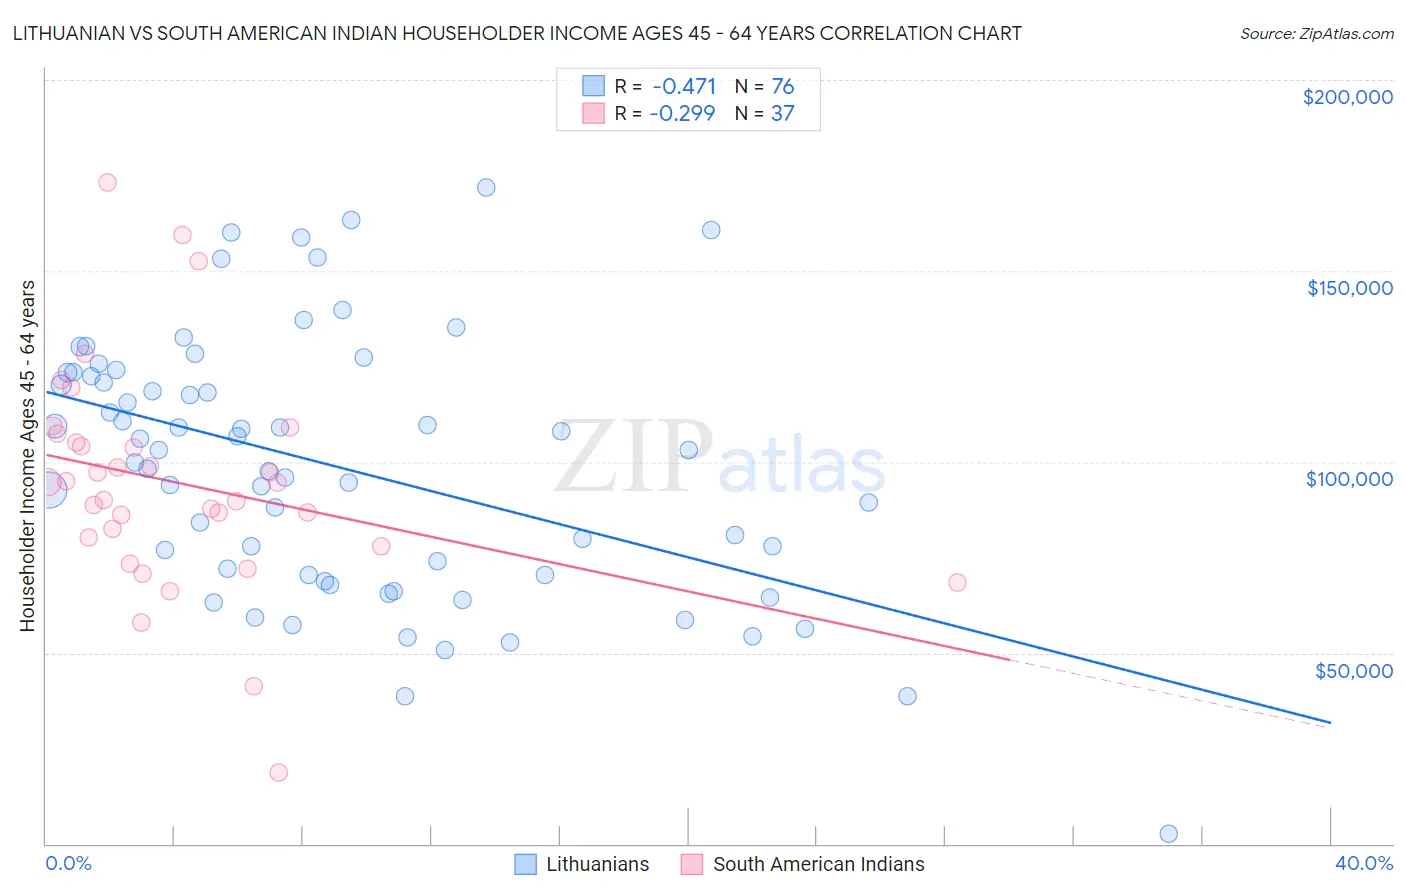 Lithuanian vs South American Indian Householder Income Ages 45 - 64 years